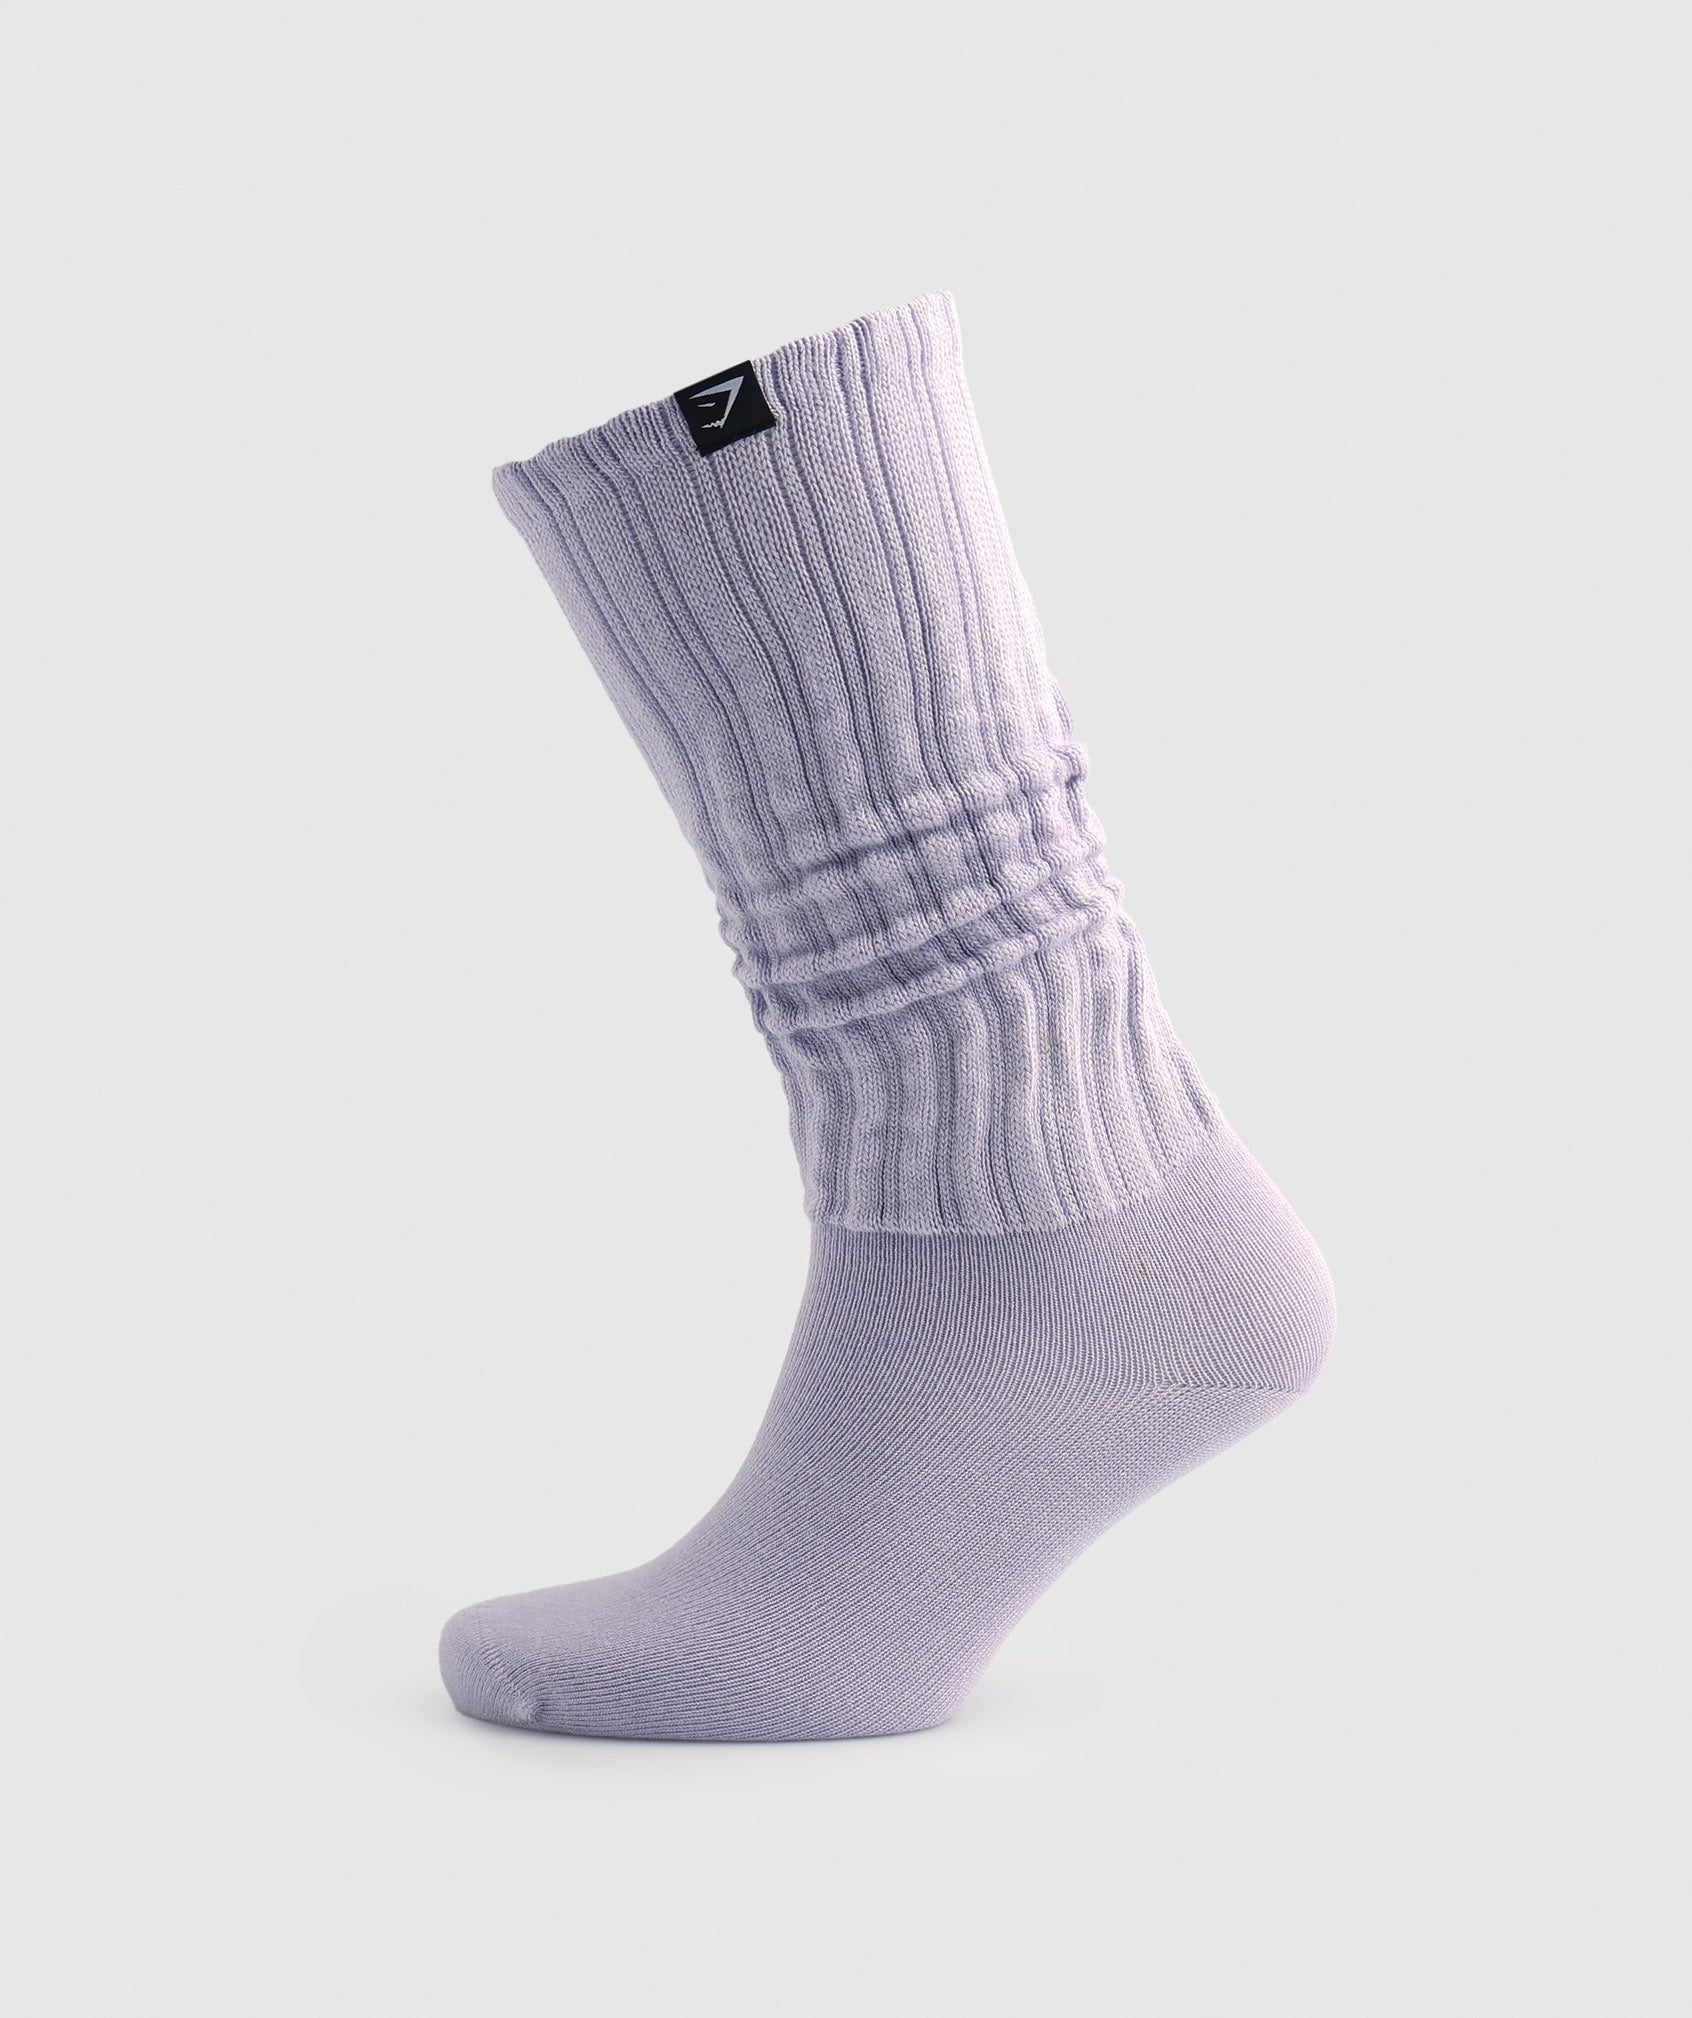 Comfy Rest Day Socks in Soft Lilac - view 1